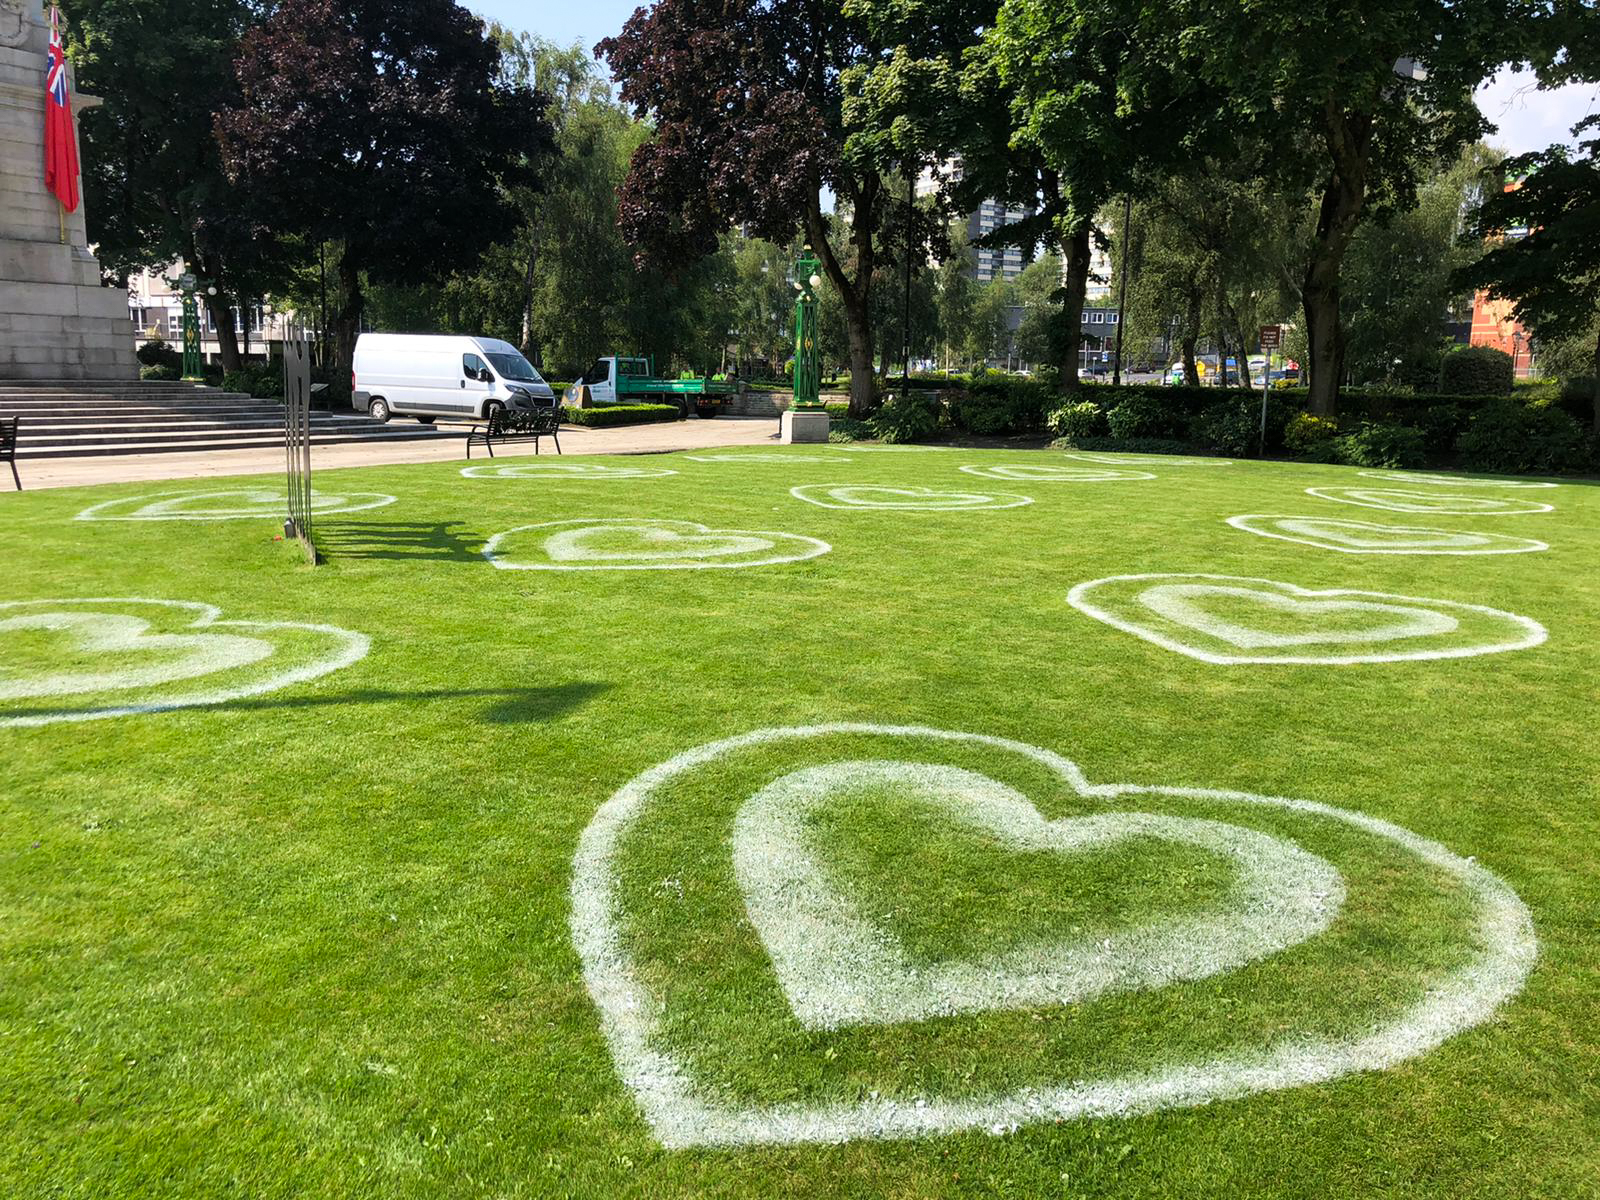 We heart Rochdale! – grass painting to promote safe social distancing in outdoor spaces and events